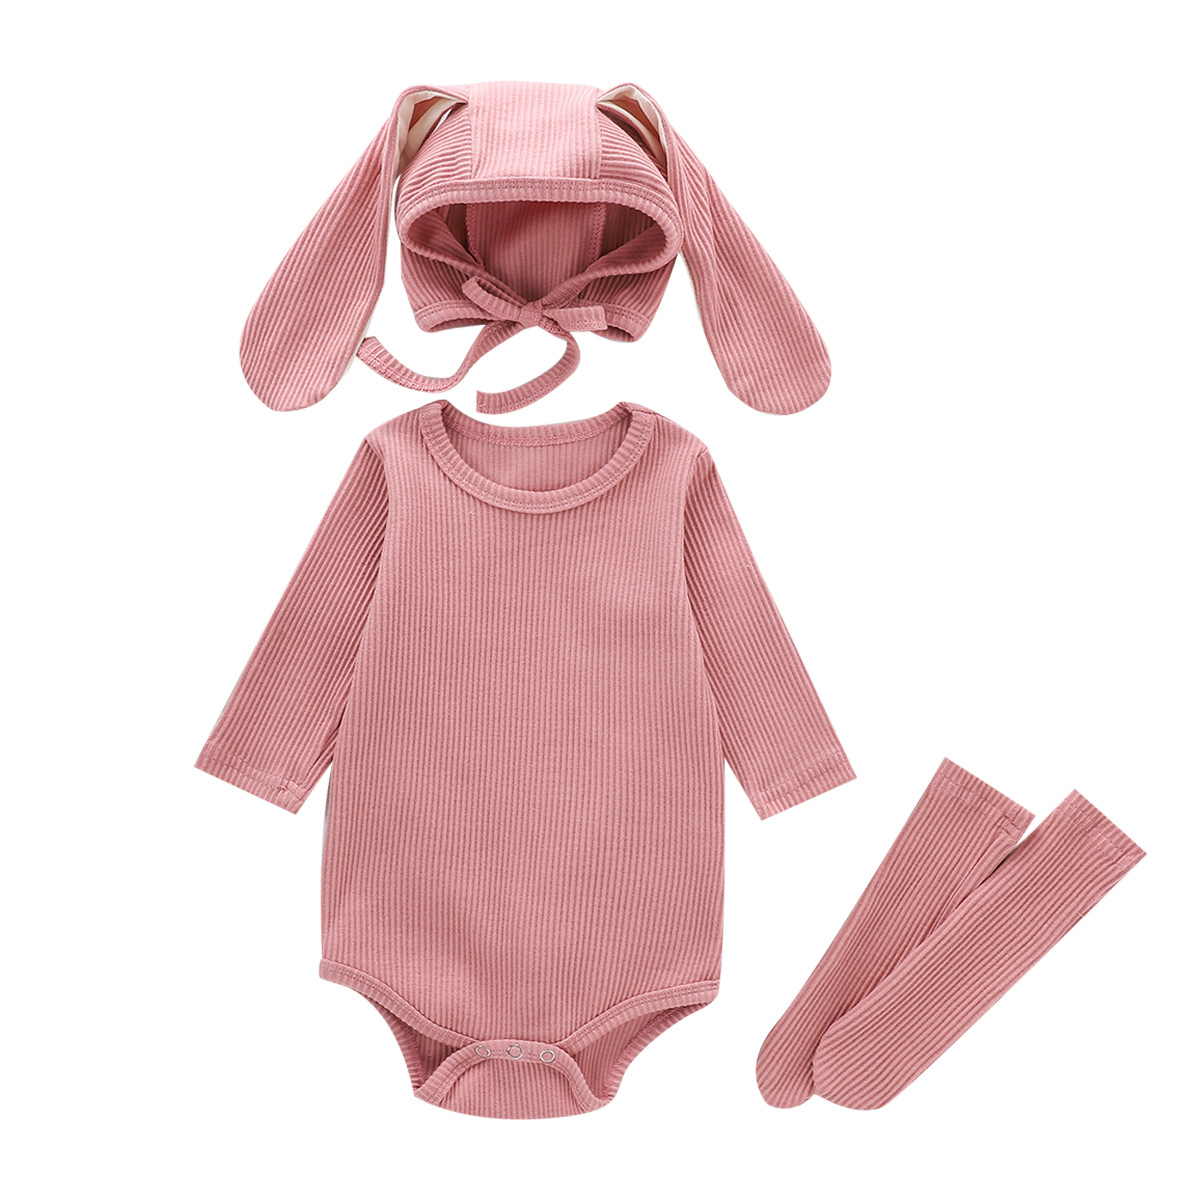 Bunny Ears Baby Coming Home Romper Gift Set